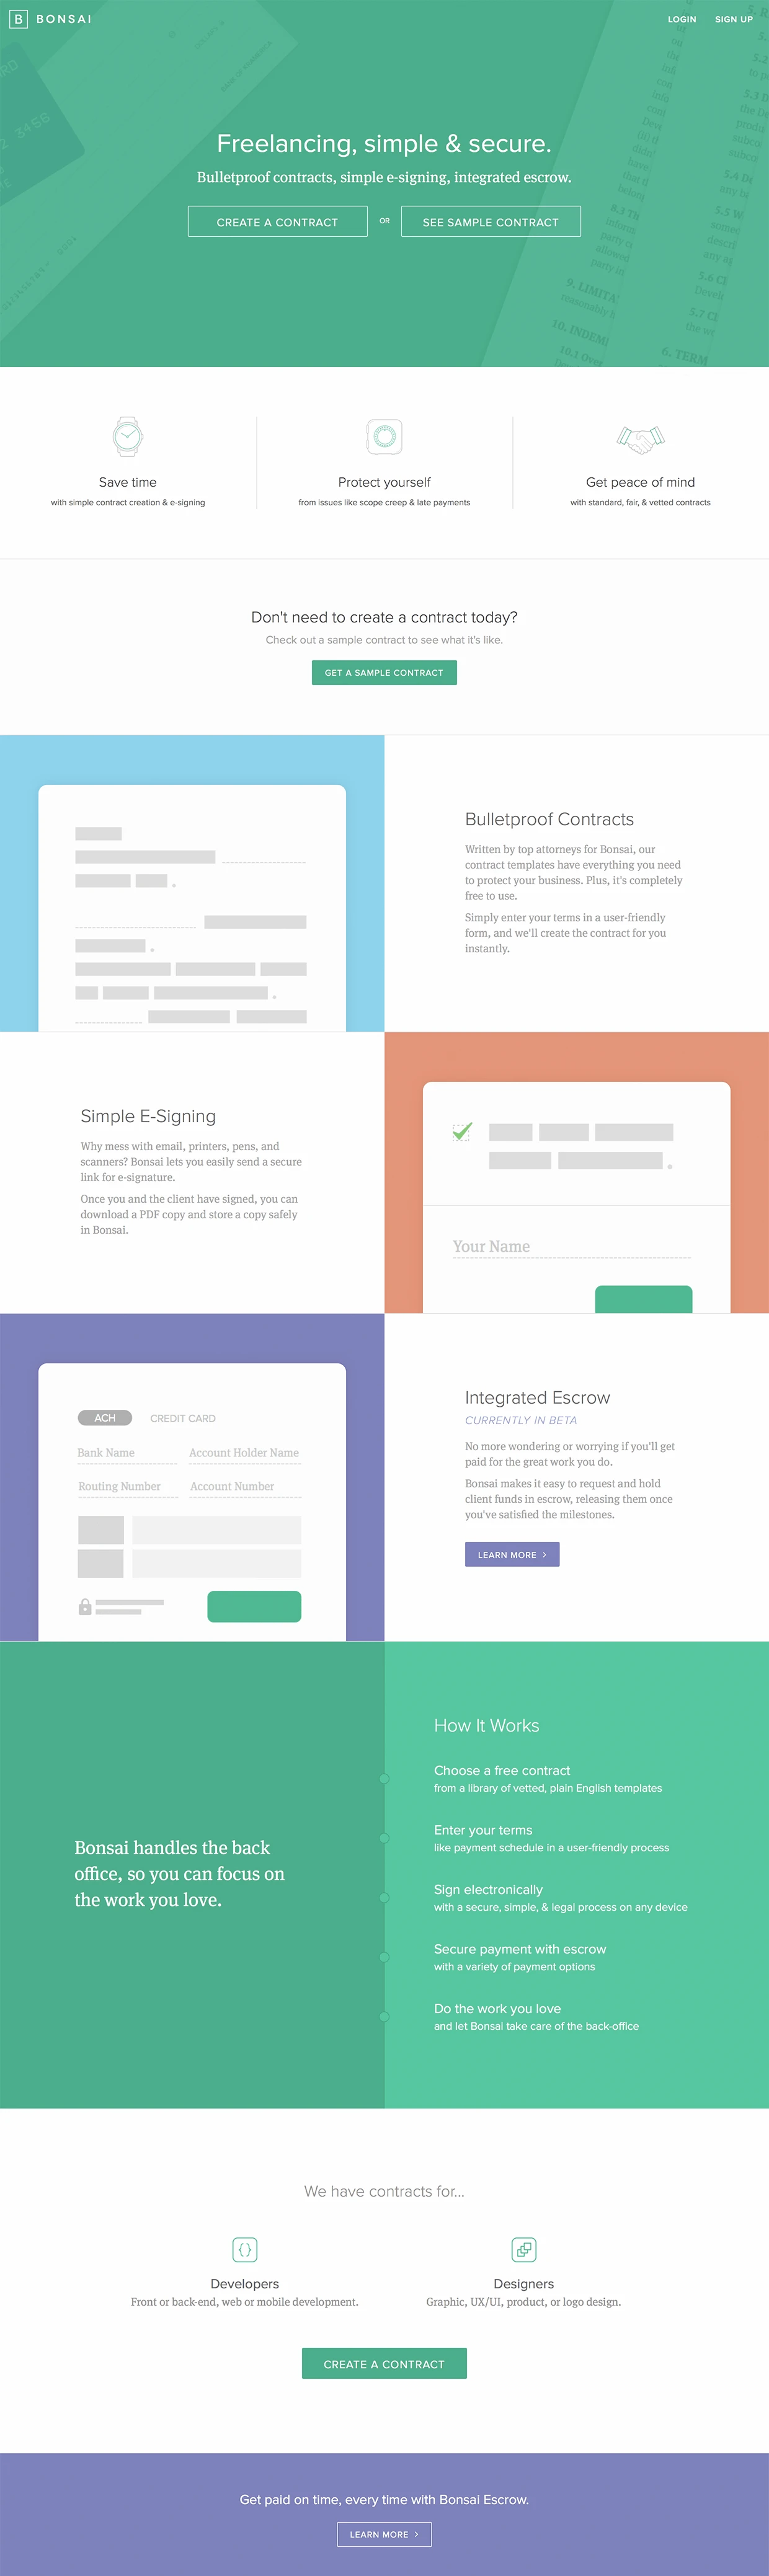 Bonsai Landing Page Example: Bonsai provides bulletproof freelance work contract templates, simple e-signing, and payment escrow for creative freelancers like designers and developers.